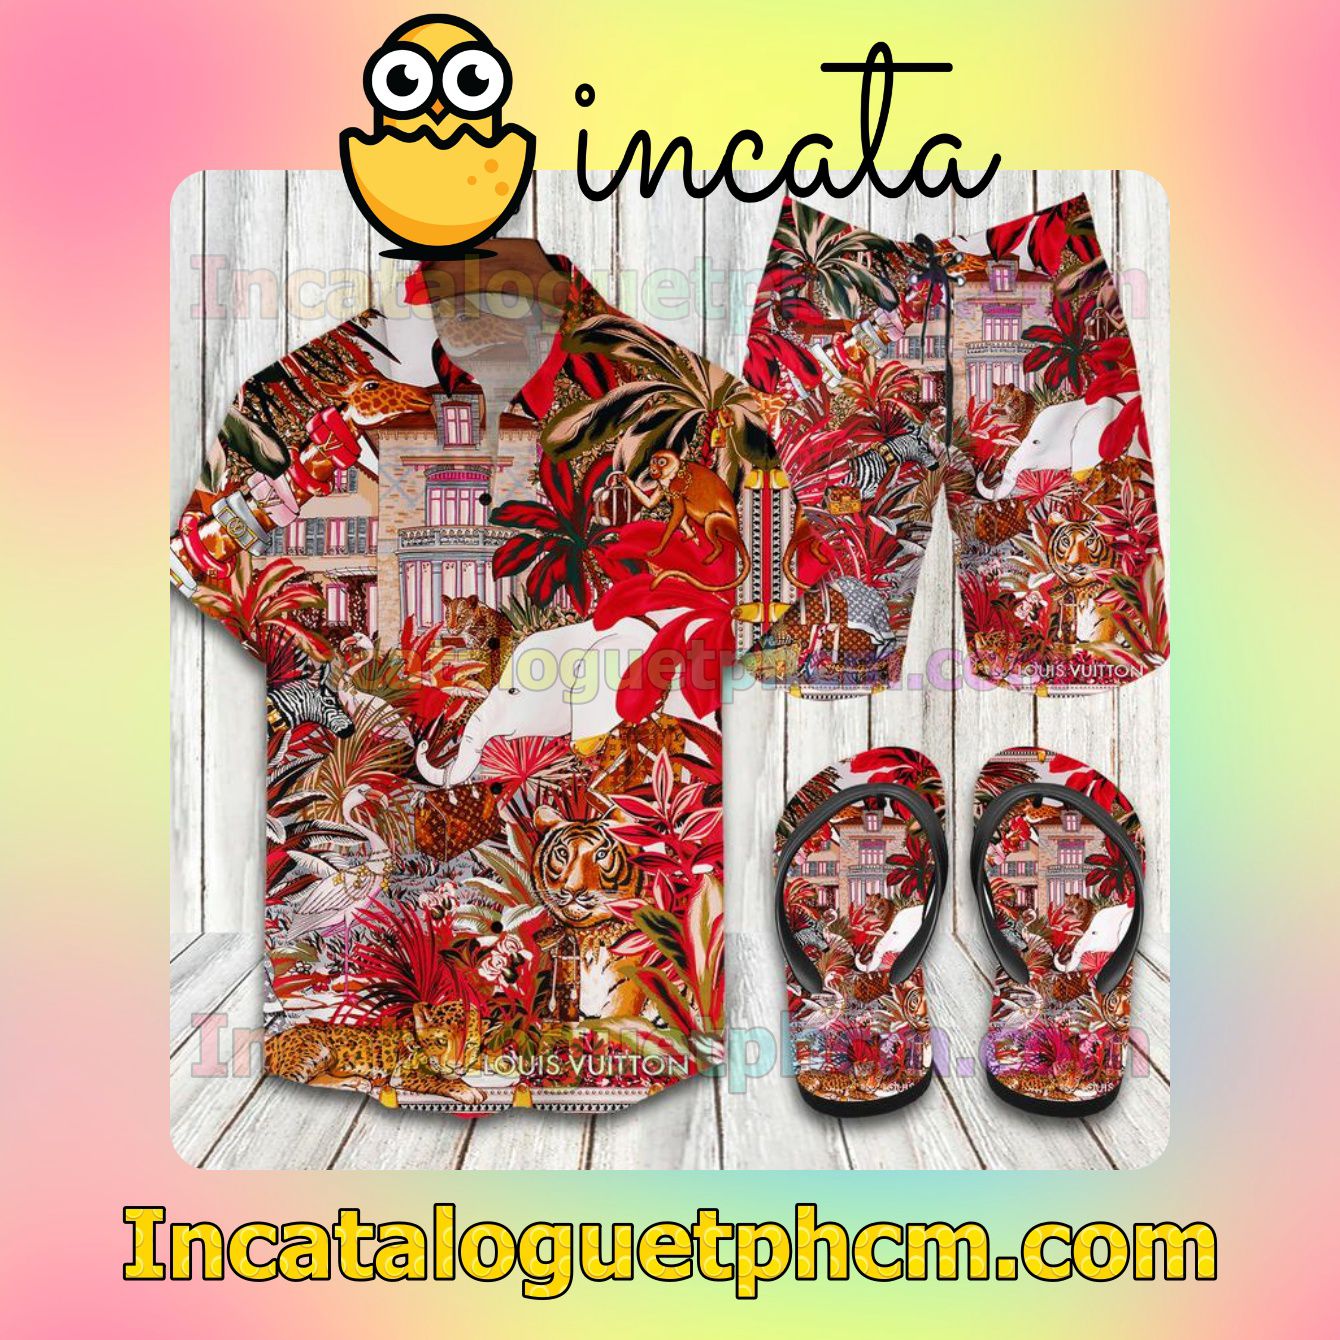 Excellent Louis Vuitton Many Animals Aloha Shirt And Shorts